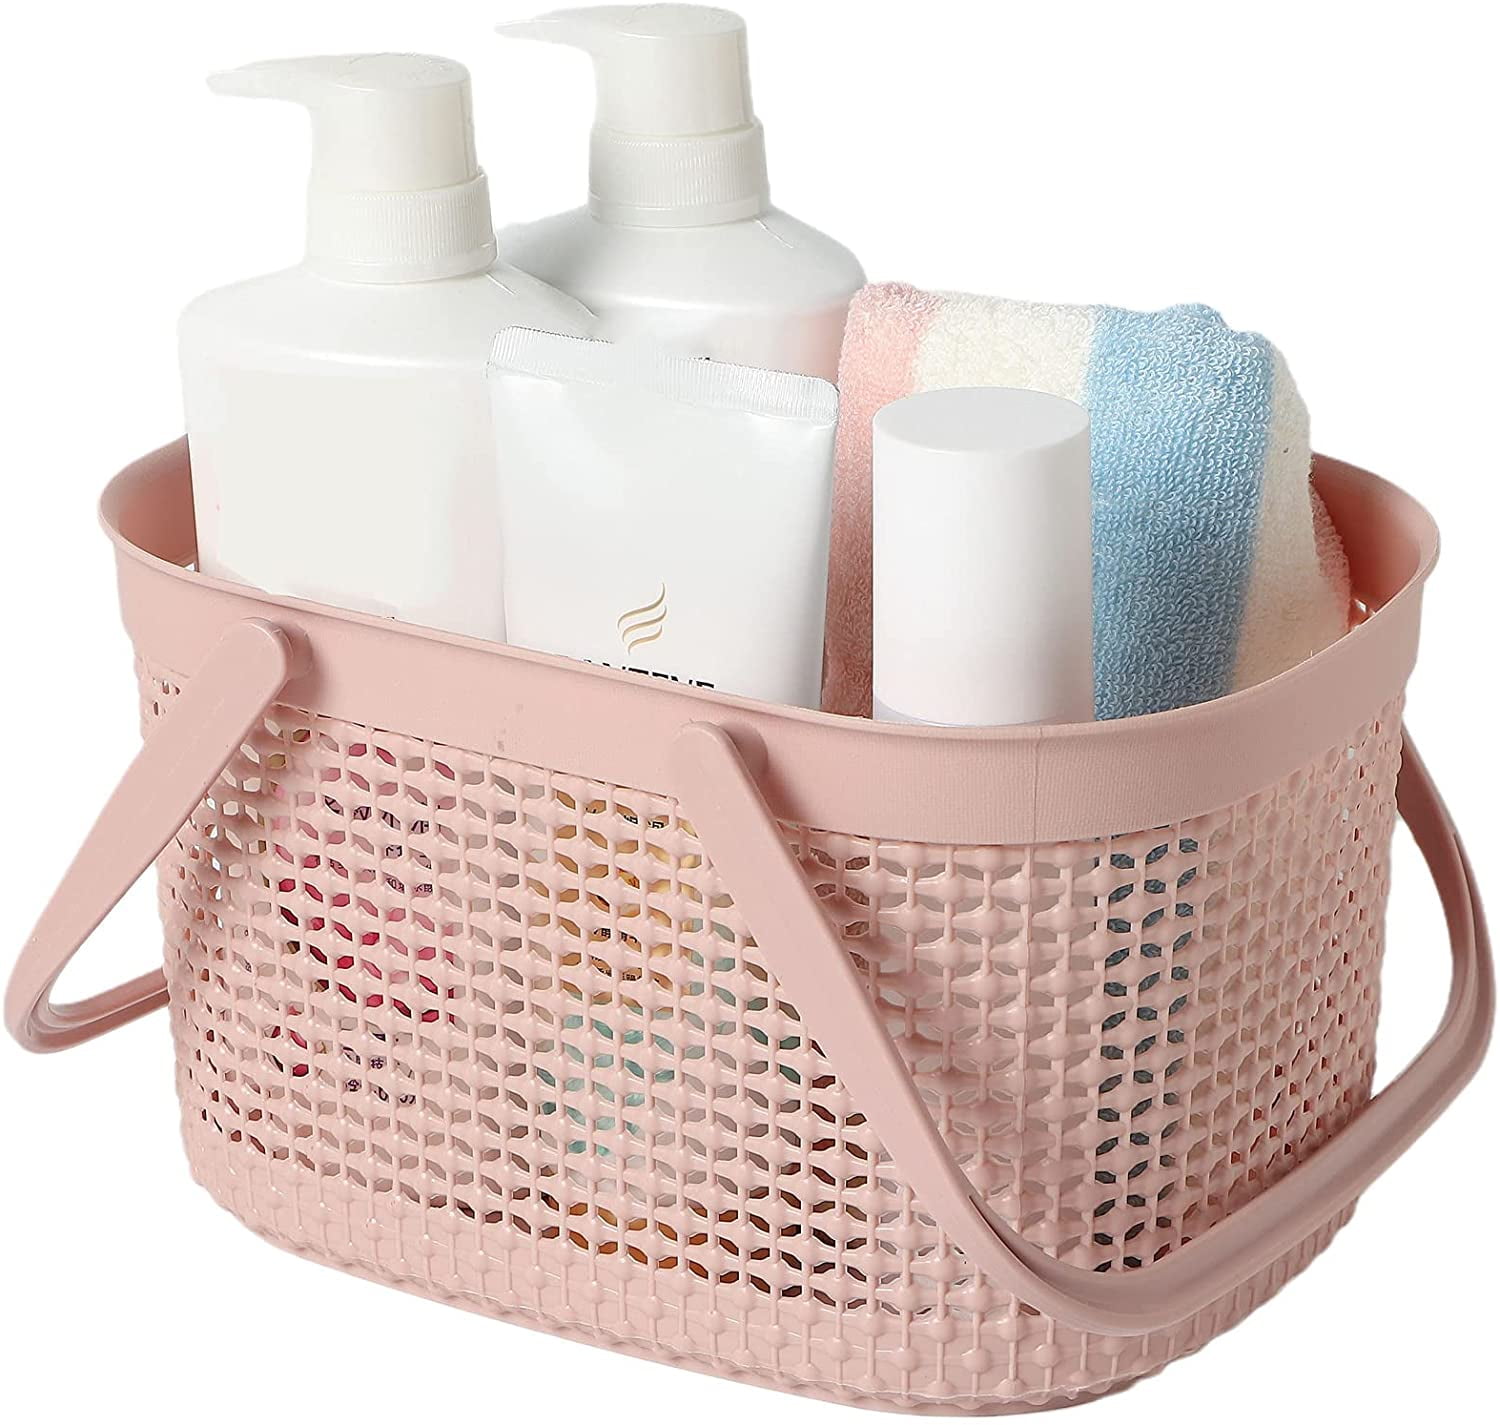 iplusmile Plastic Hanging Shower Caddy Basket, Shower Caddy Portable for  College Dorm Room, Laundry Organizer Container Trolley for Bathroom,  Kitchen